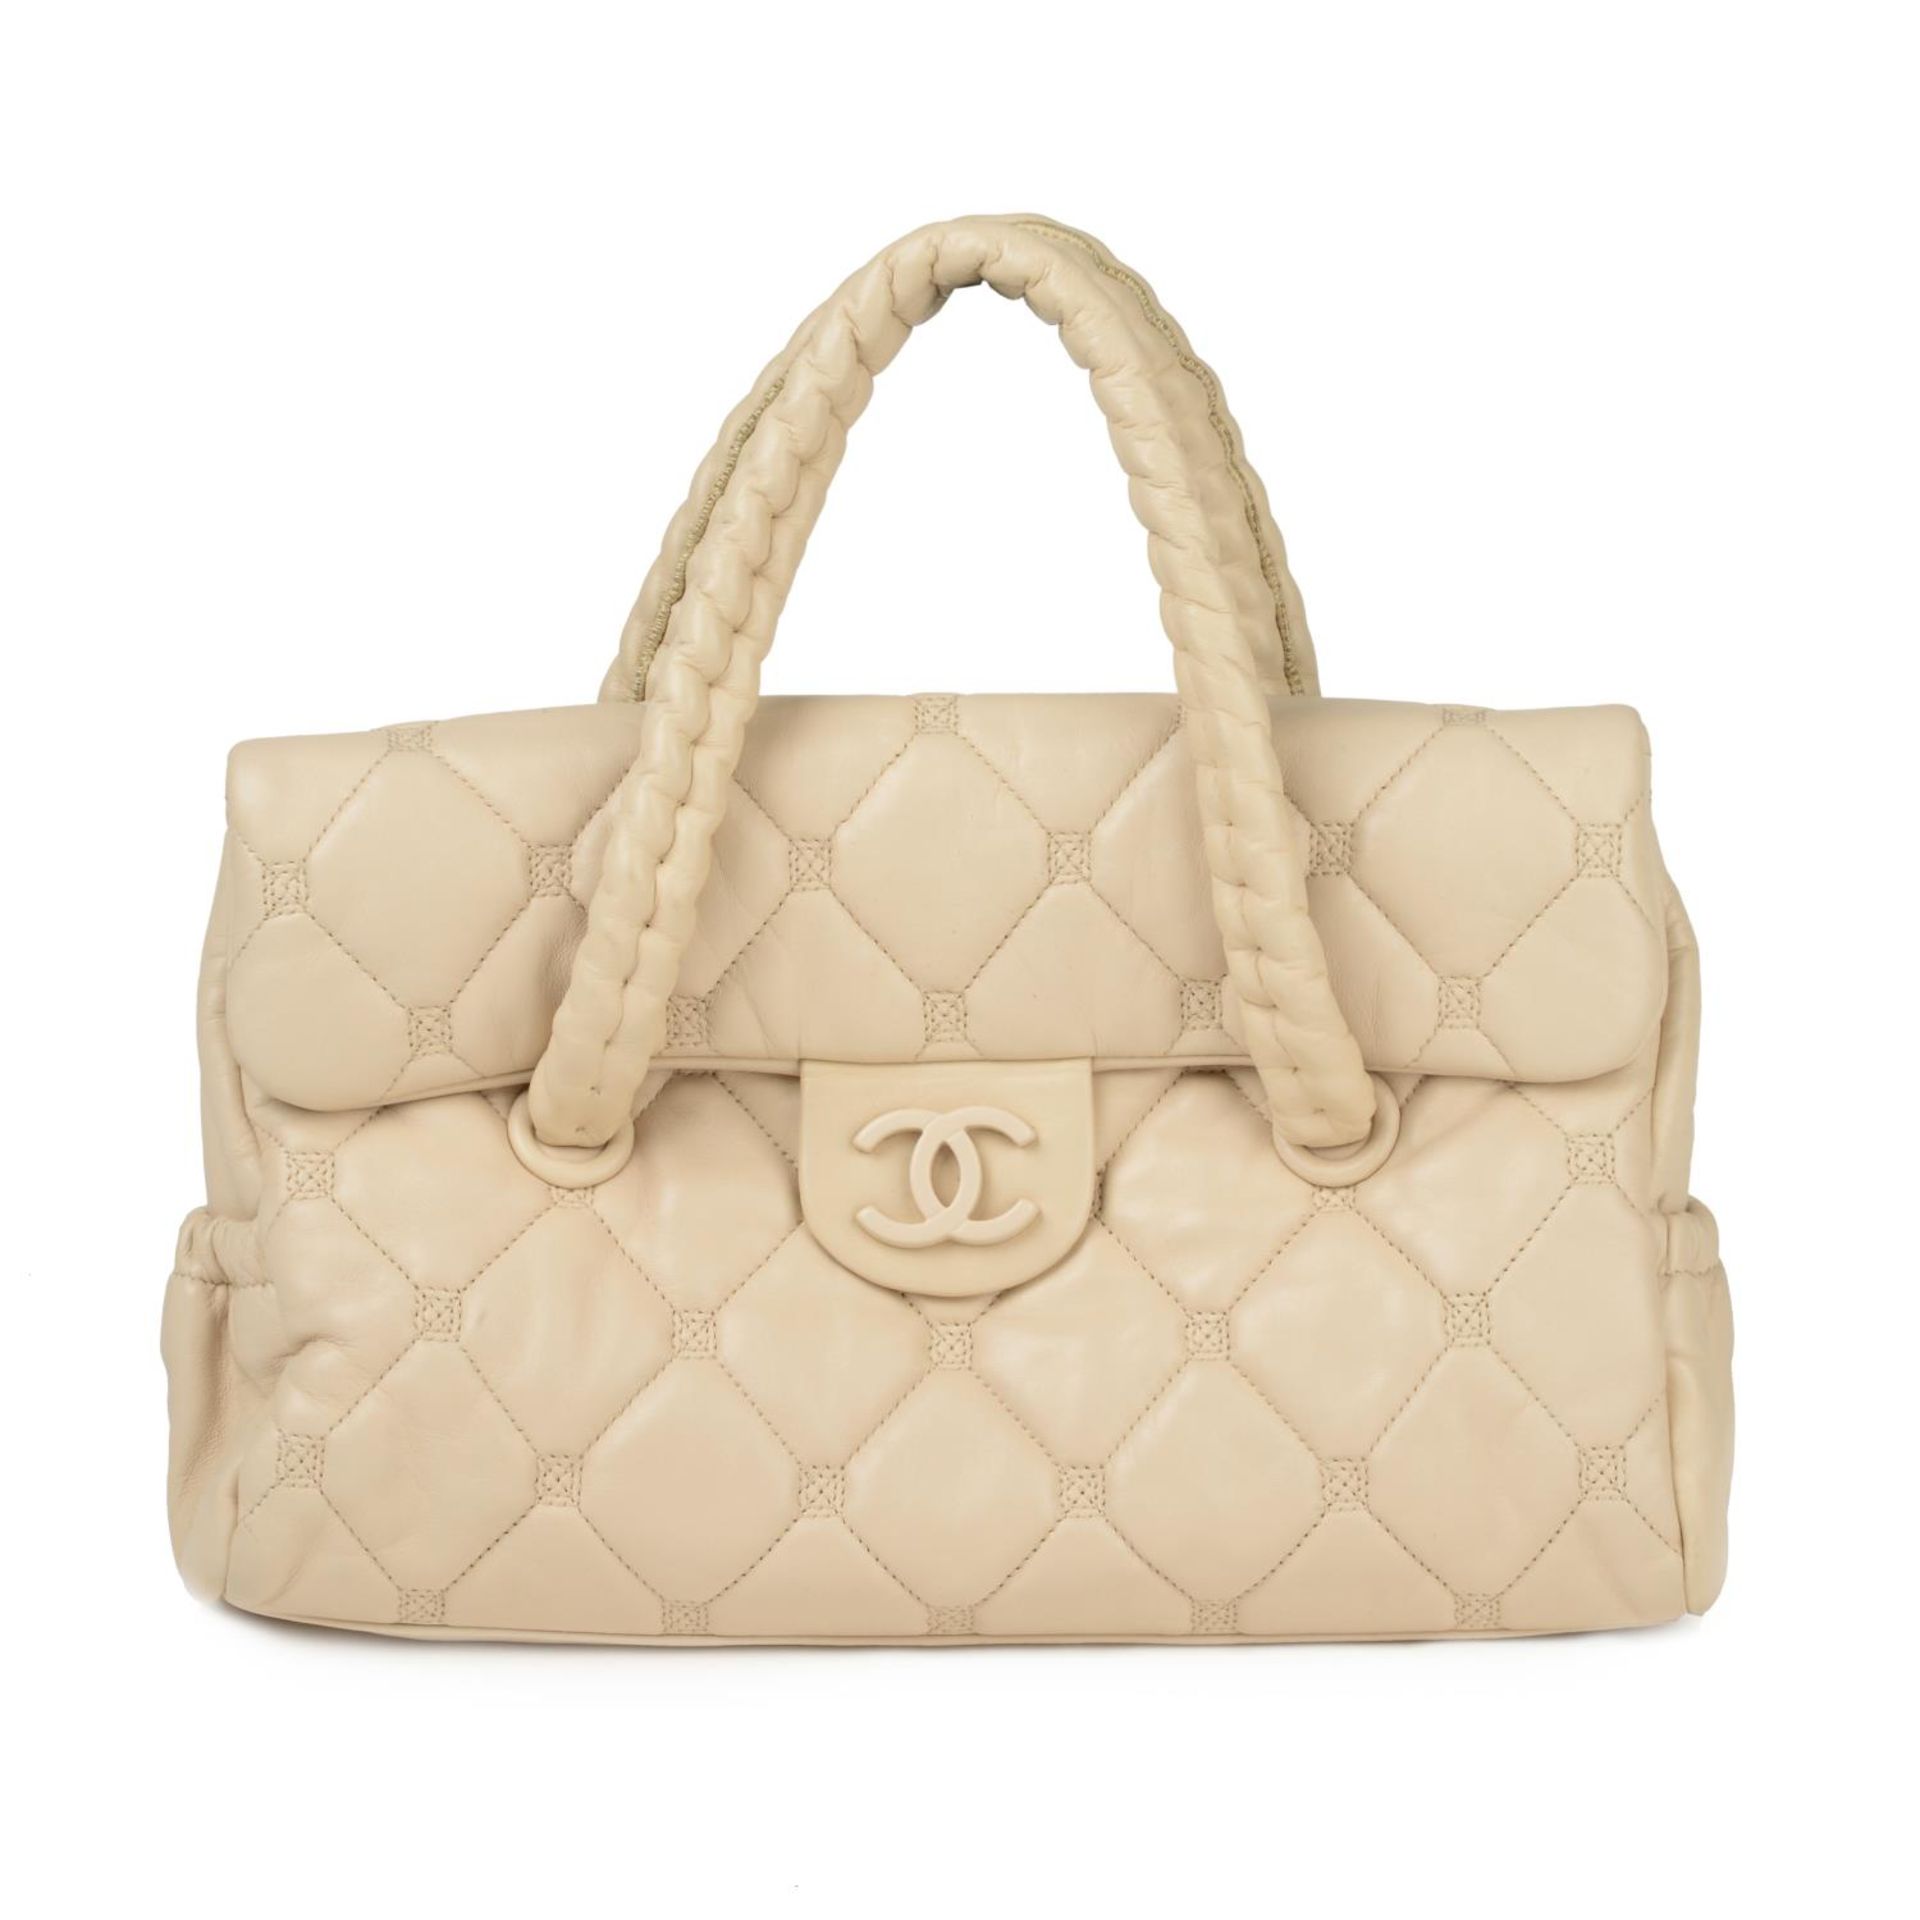 CHANEL - a pale quilted leather Hidden Chain handbag.